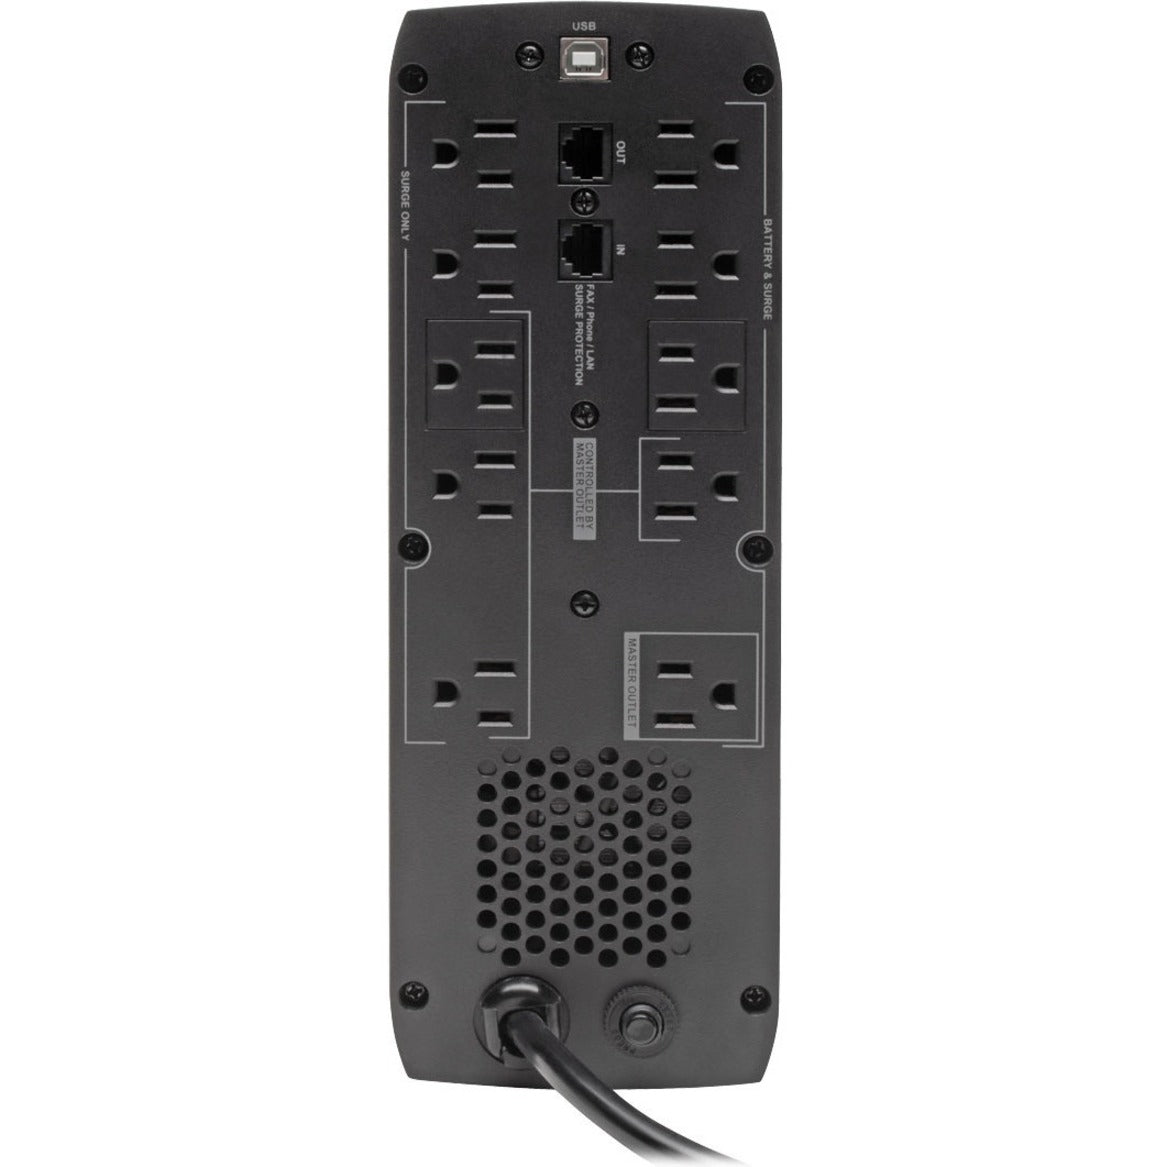 Tripp Lite ECO1300LCD 1300VA Tower UPS, 10 Outlets, Energy Star, USB Port